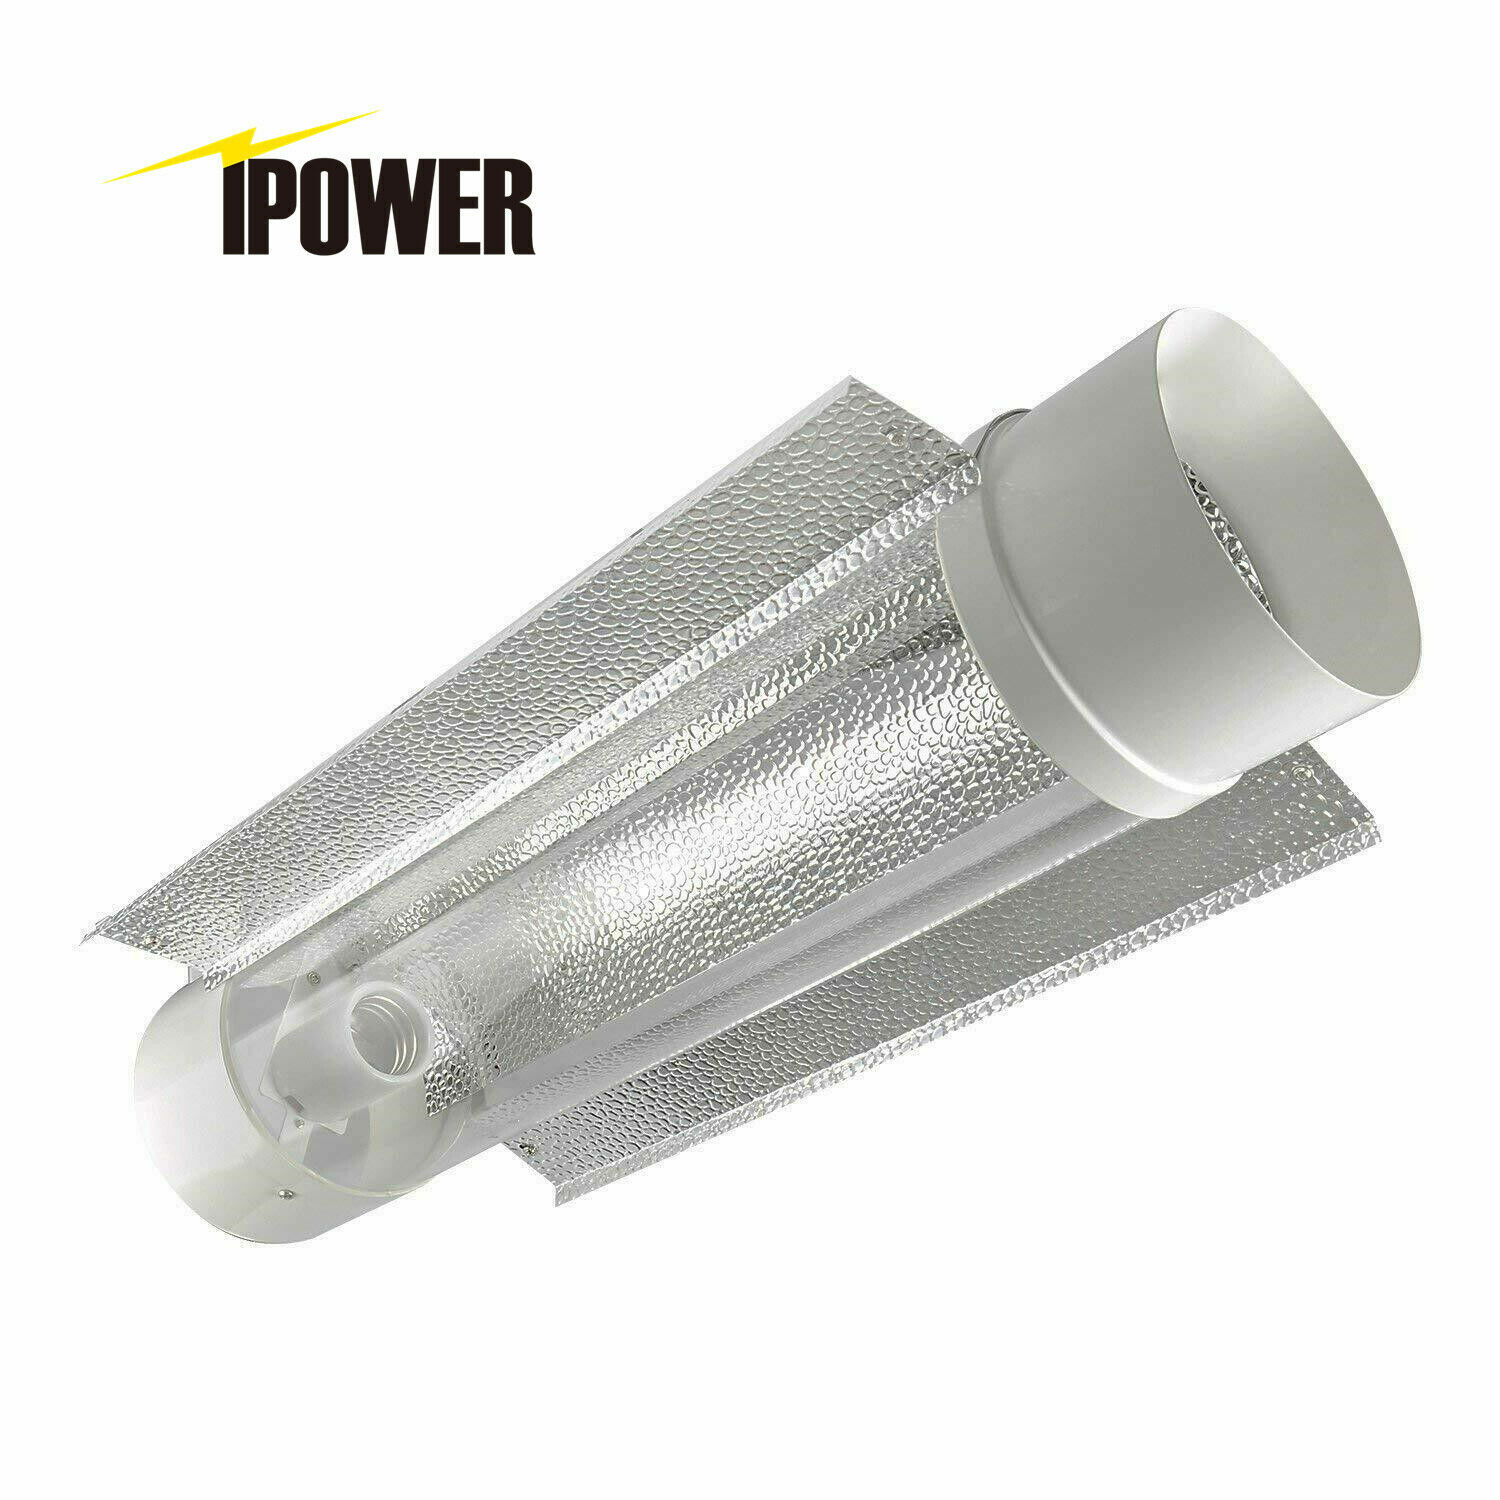 iPower 6'' Inch Cool Tube Reflector Hood Gull Wing for HPS MH Grow Light Kits